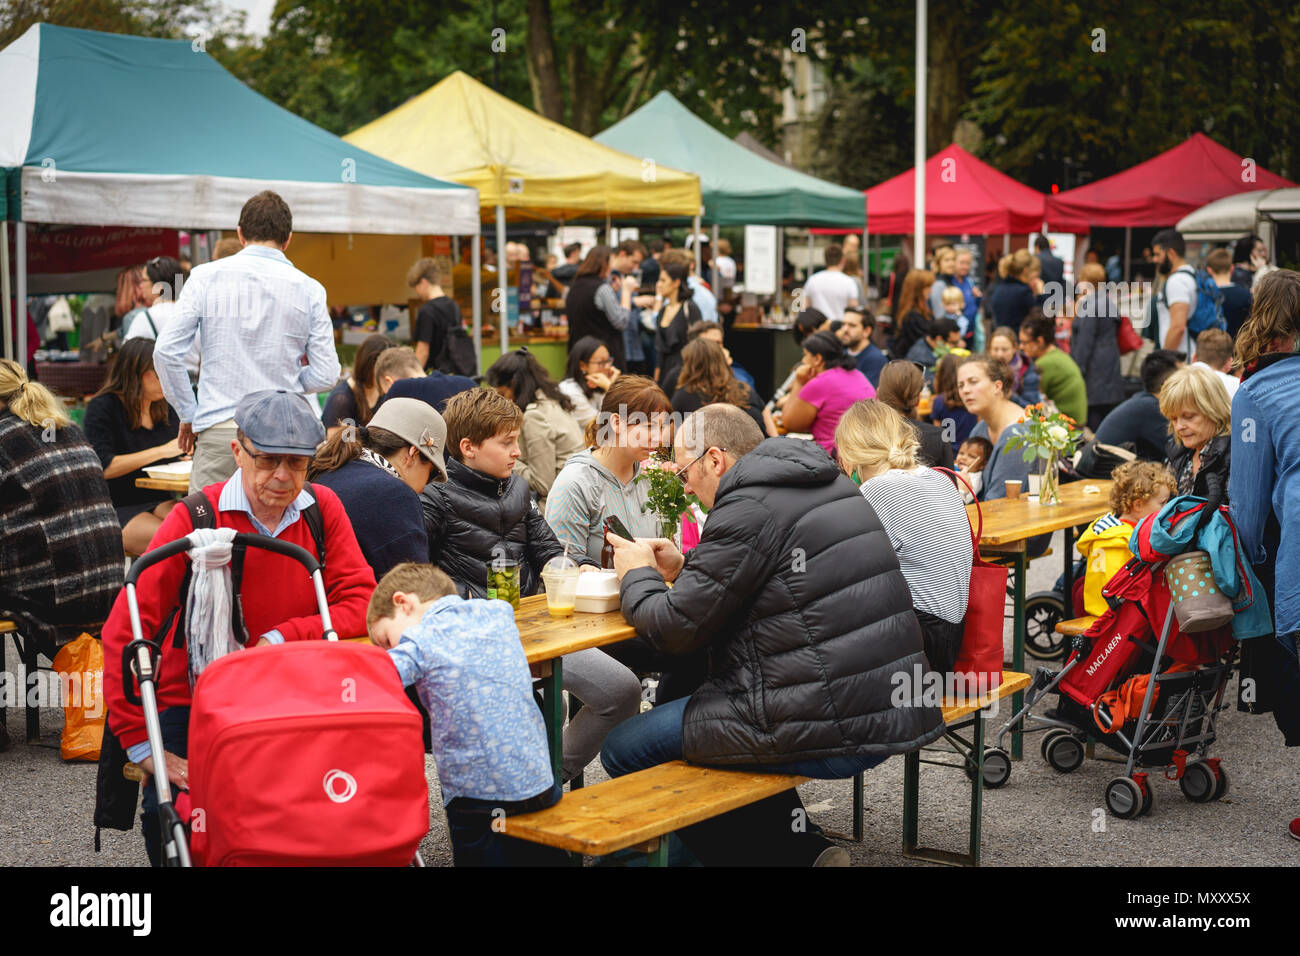 London, UK - October 2017. People shopping at Brockley Market, a local farmer's market held every Saturday in Lewisham. Landscape format. Stock Photo